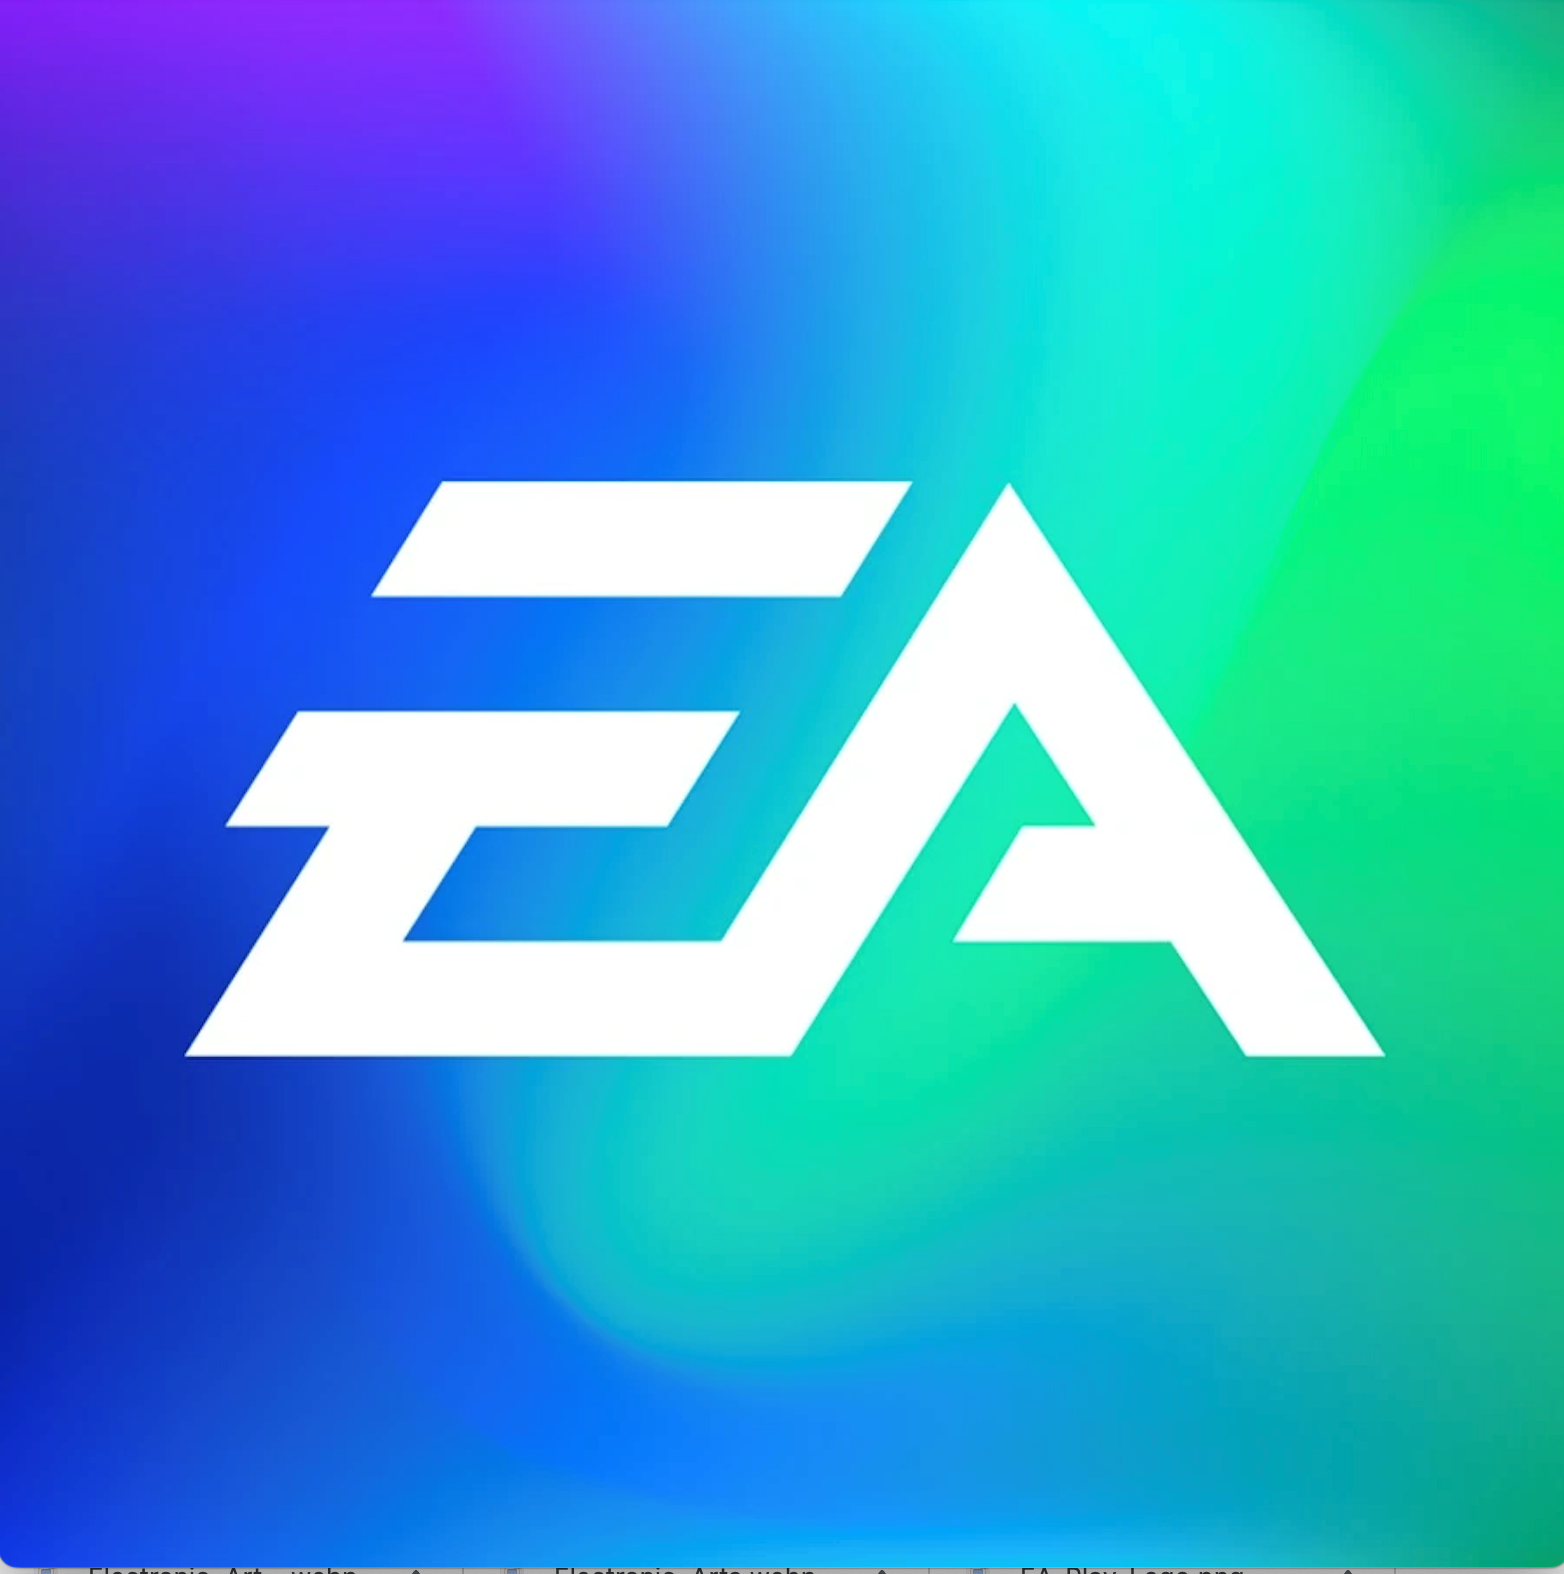 🔵EA PLAY 1-12 MONTHS PS4/PS5 PLAYSTATION 🟦 TURKEY🇹🇷